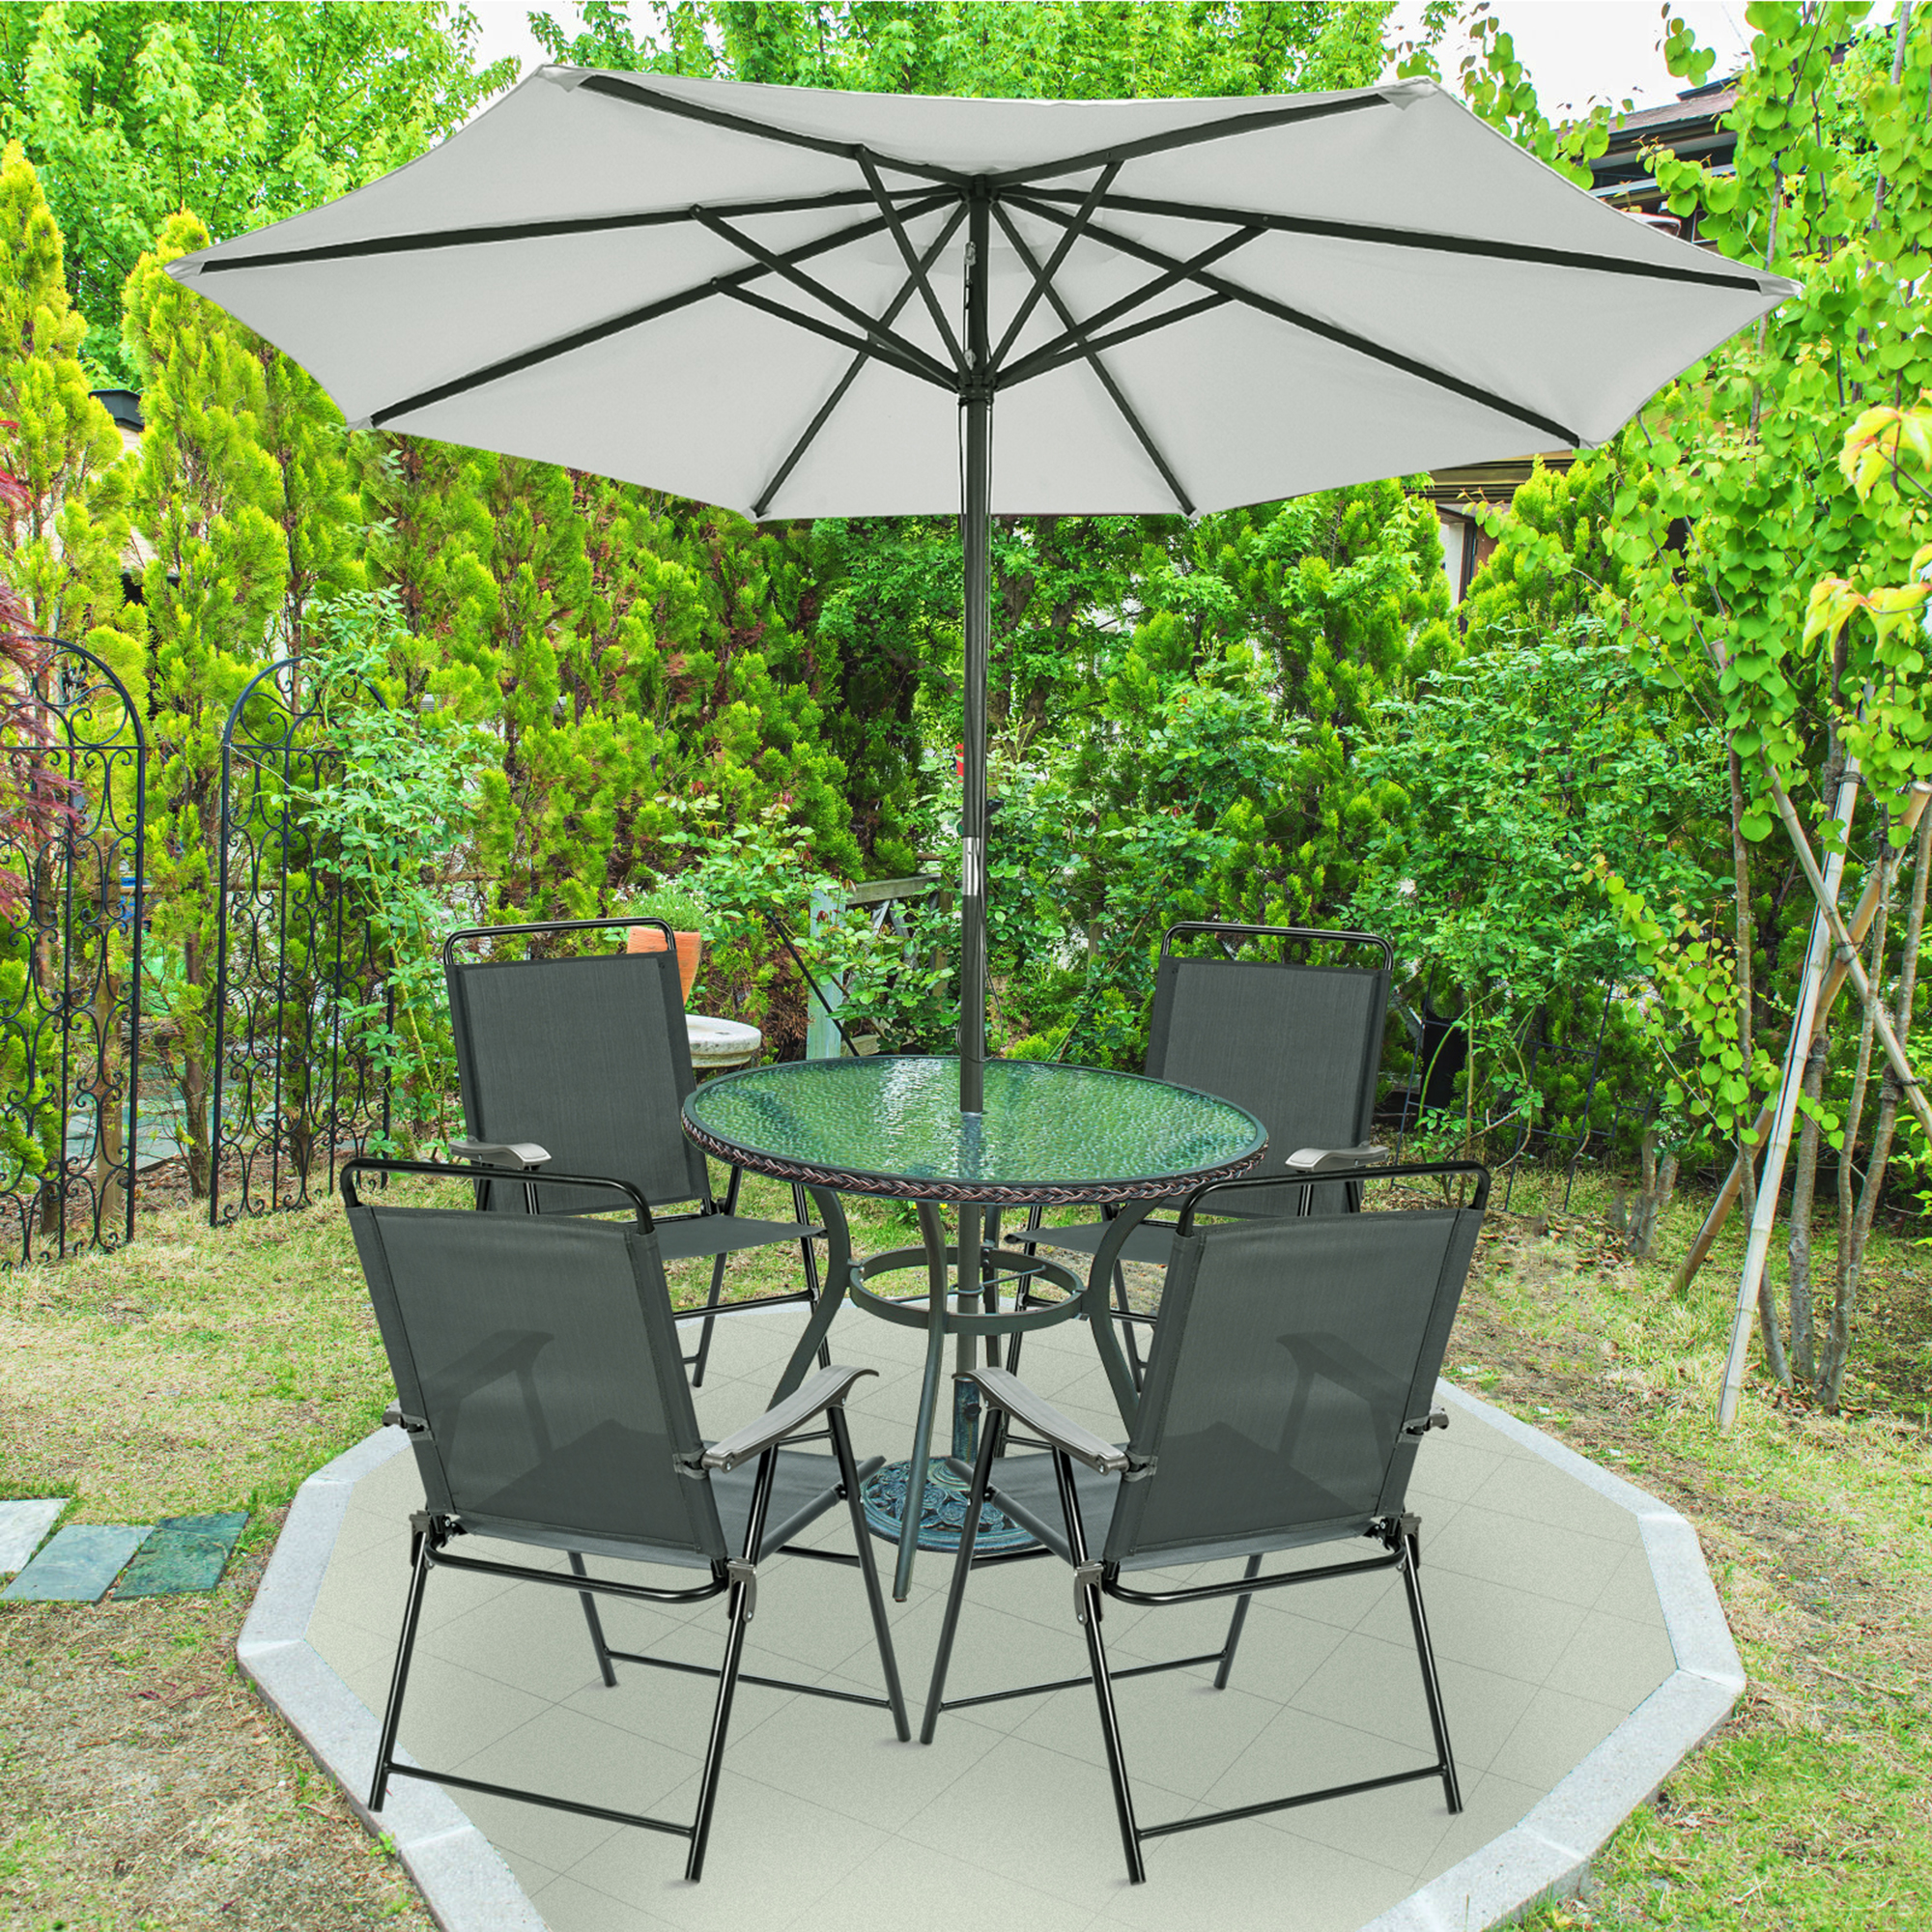 Gymax Set of 4 Folding Patio Chair Portable Sling Chair Yard Garden Outdoor - image 3 of 10